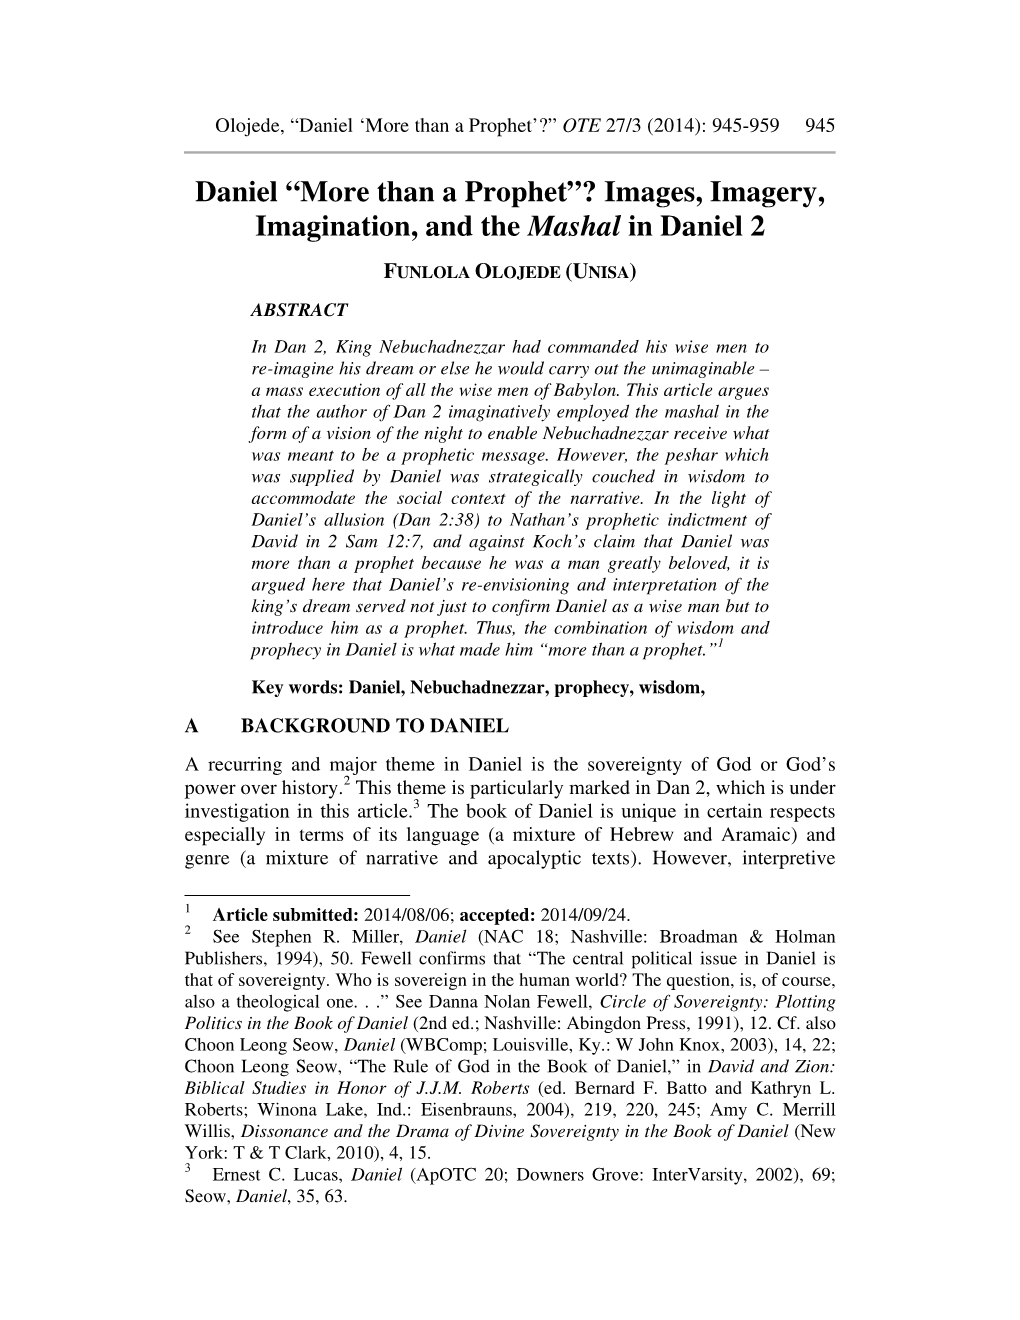 Daniel “More Than a Prophet”? Images, Imagery, Imagination, and the Mashal in Daniel 2